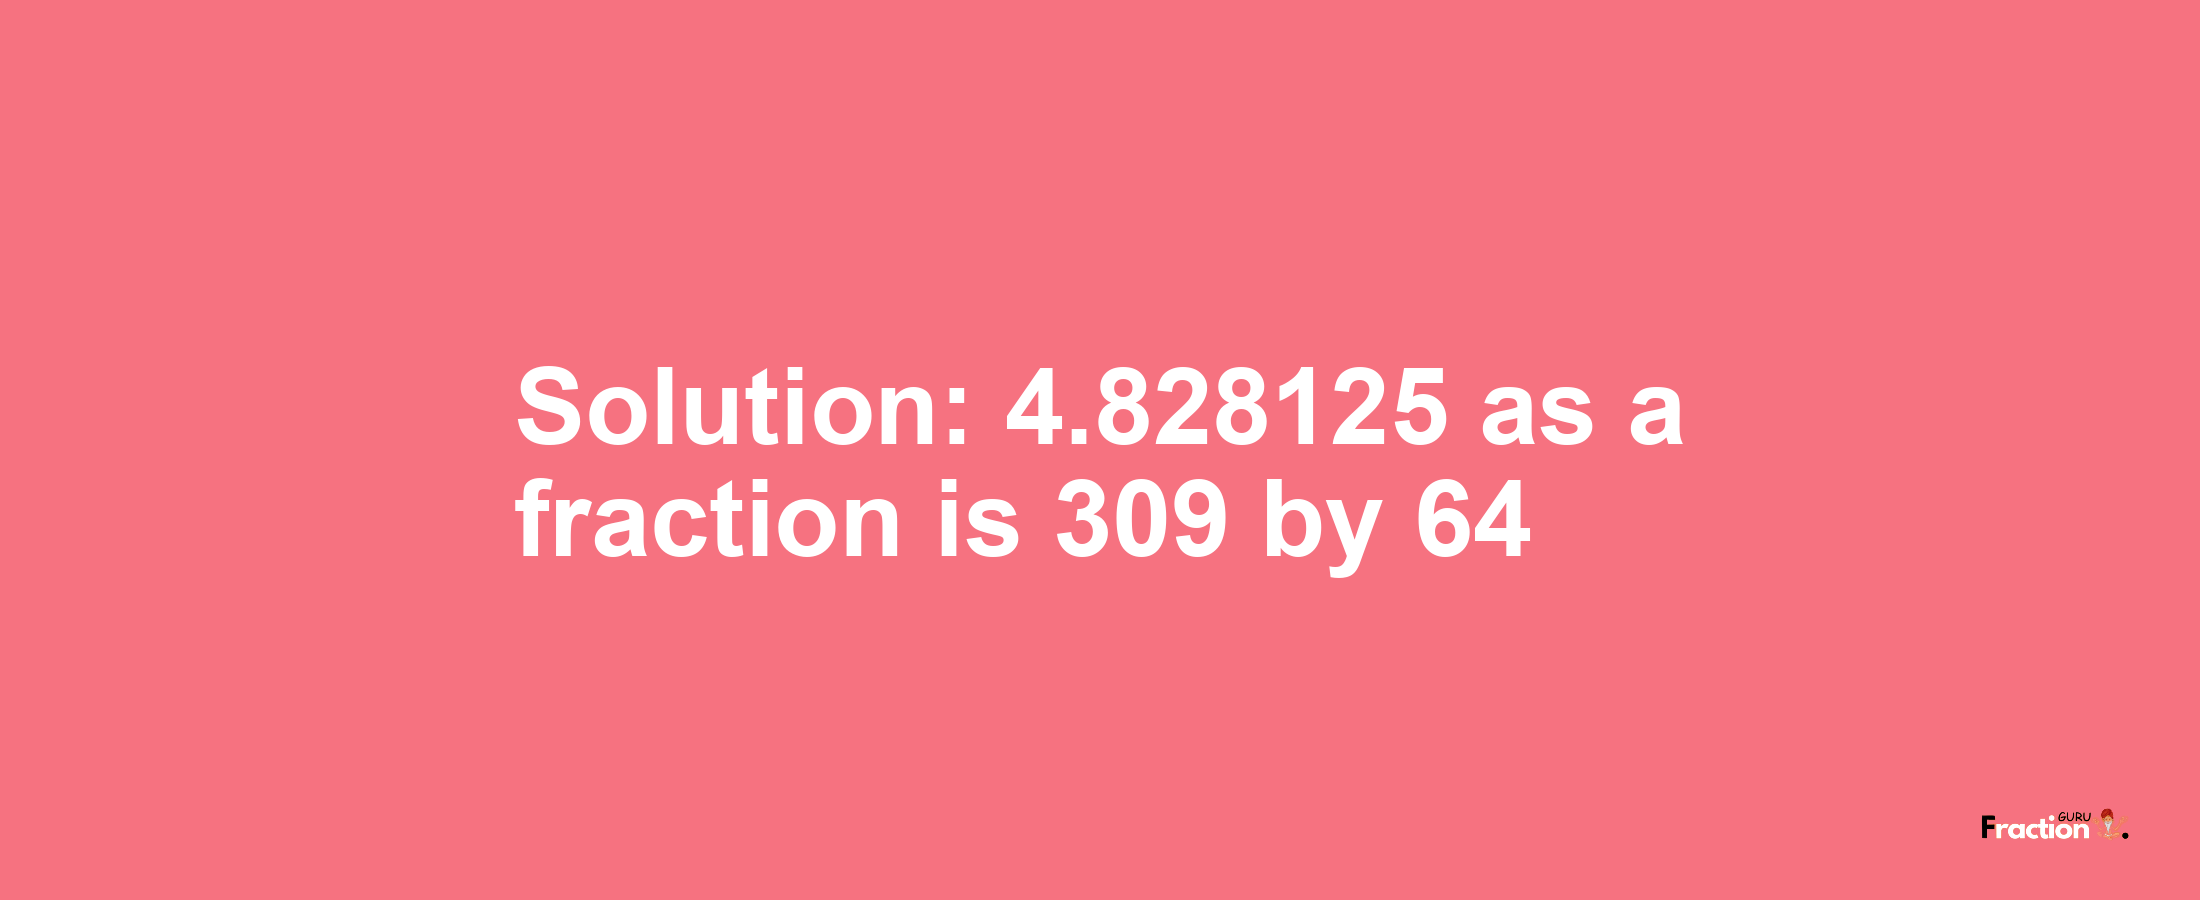 Solution:4.828125 as a fraction is 309/64